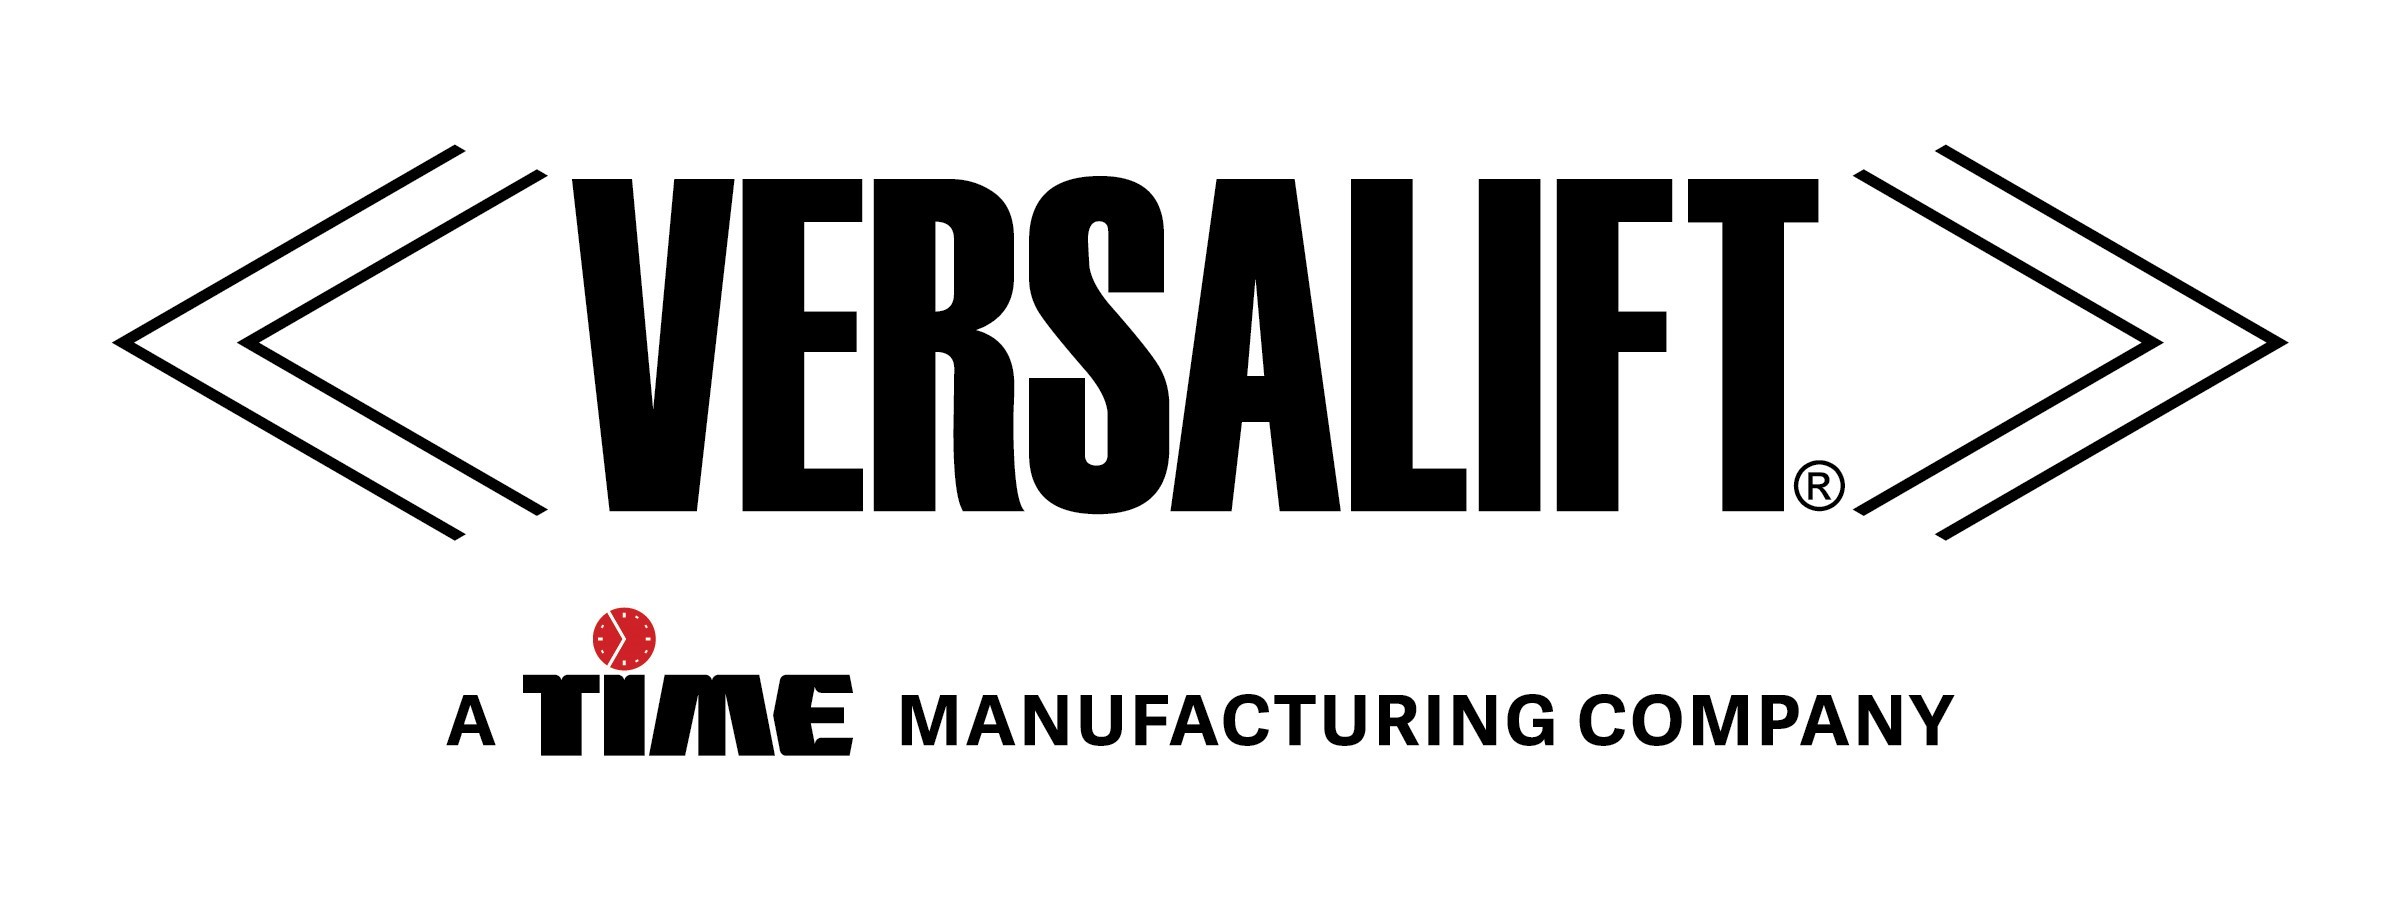 VERSALIFT is a leading manufacturer of bucket trucks, digger derricks, aerial lifts and other specialty equipment for power generation, transmission and distribution, investor-owned utility, telecommunications, light and sign, and tree care industries. (PRNewsfoto/Versalift)